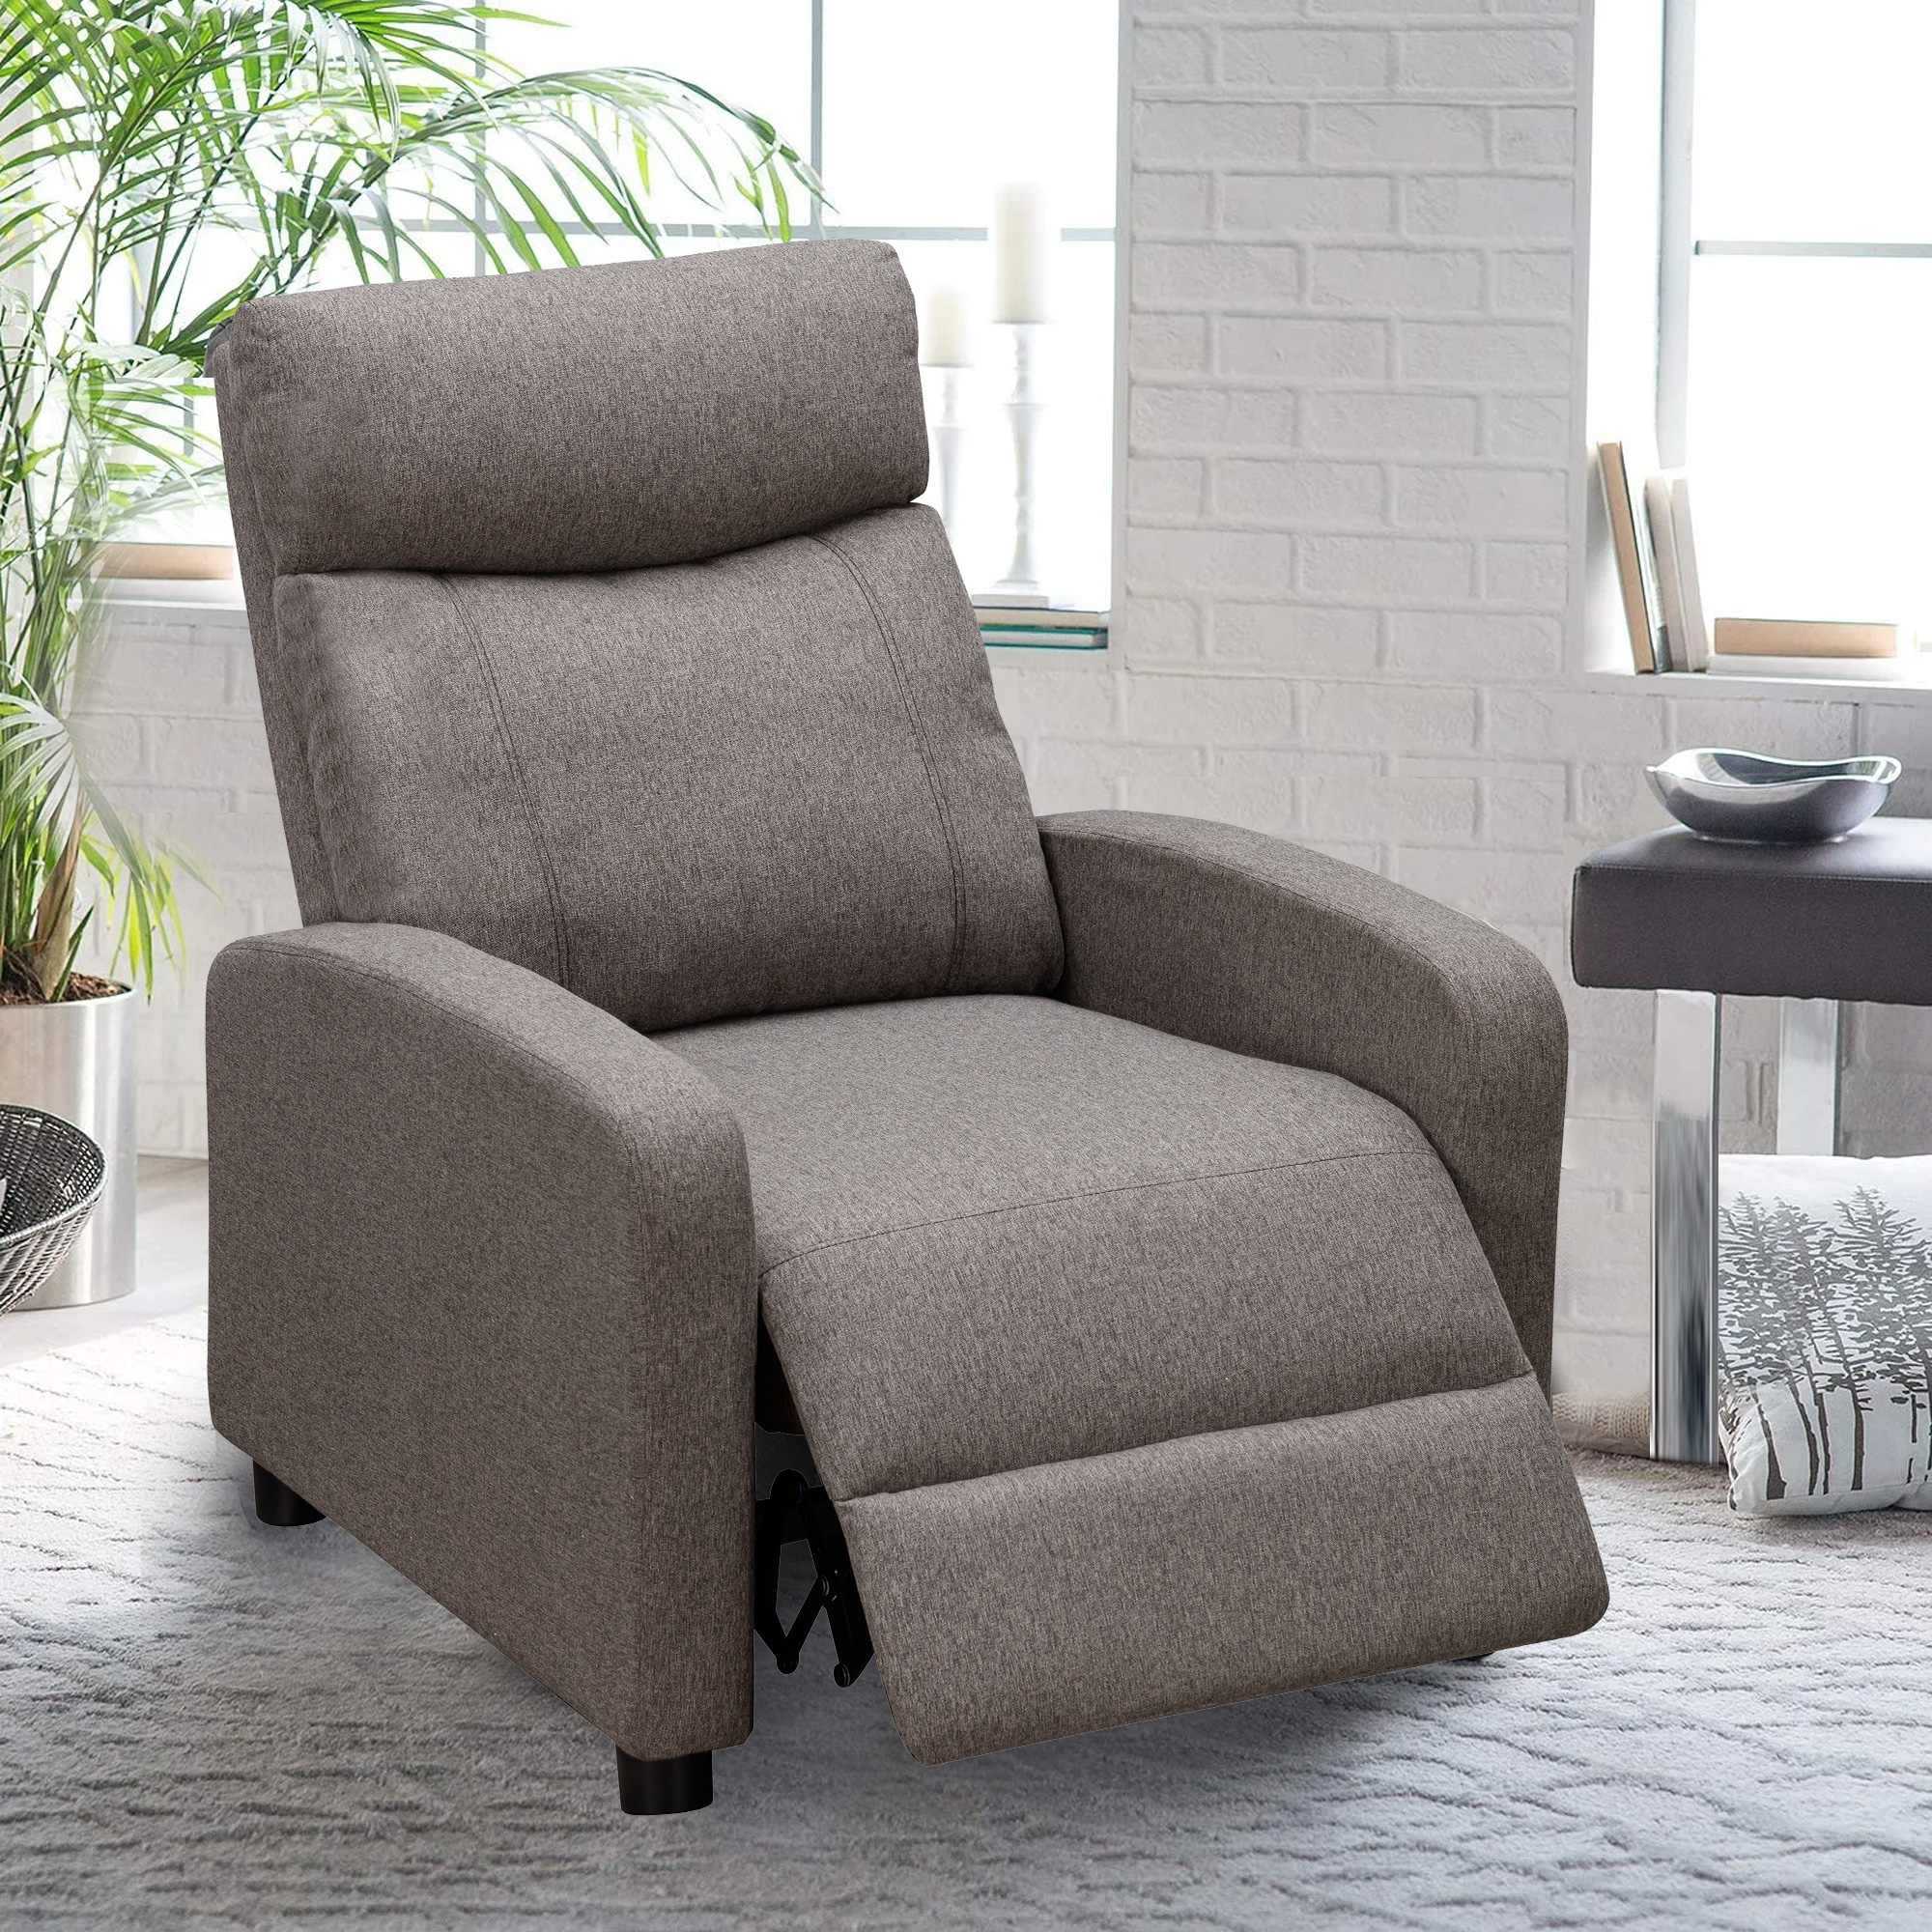 Comhoma Push Back Theater Adjustable Recliner with Footrest, Grey Fabric - image 5 of 8